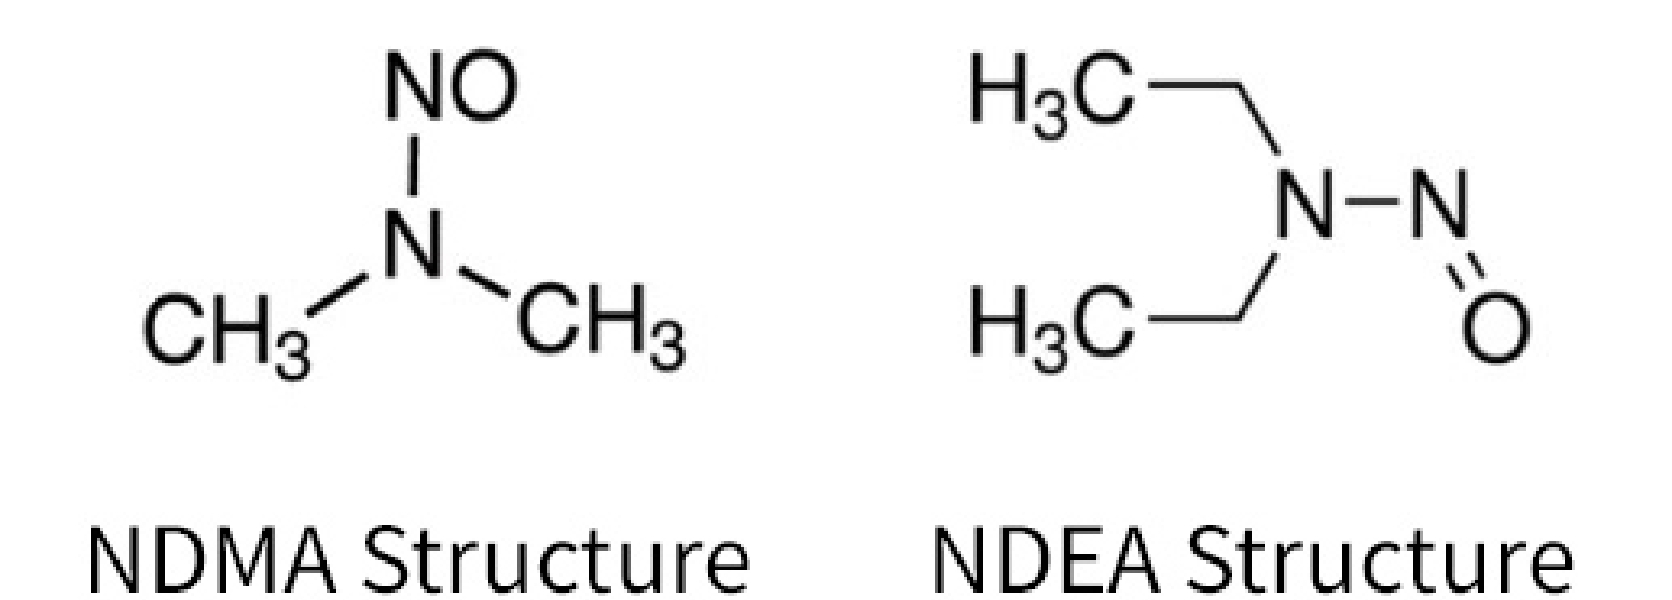 Structural formula of NDMA Structural formula of NDEA